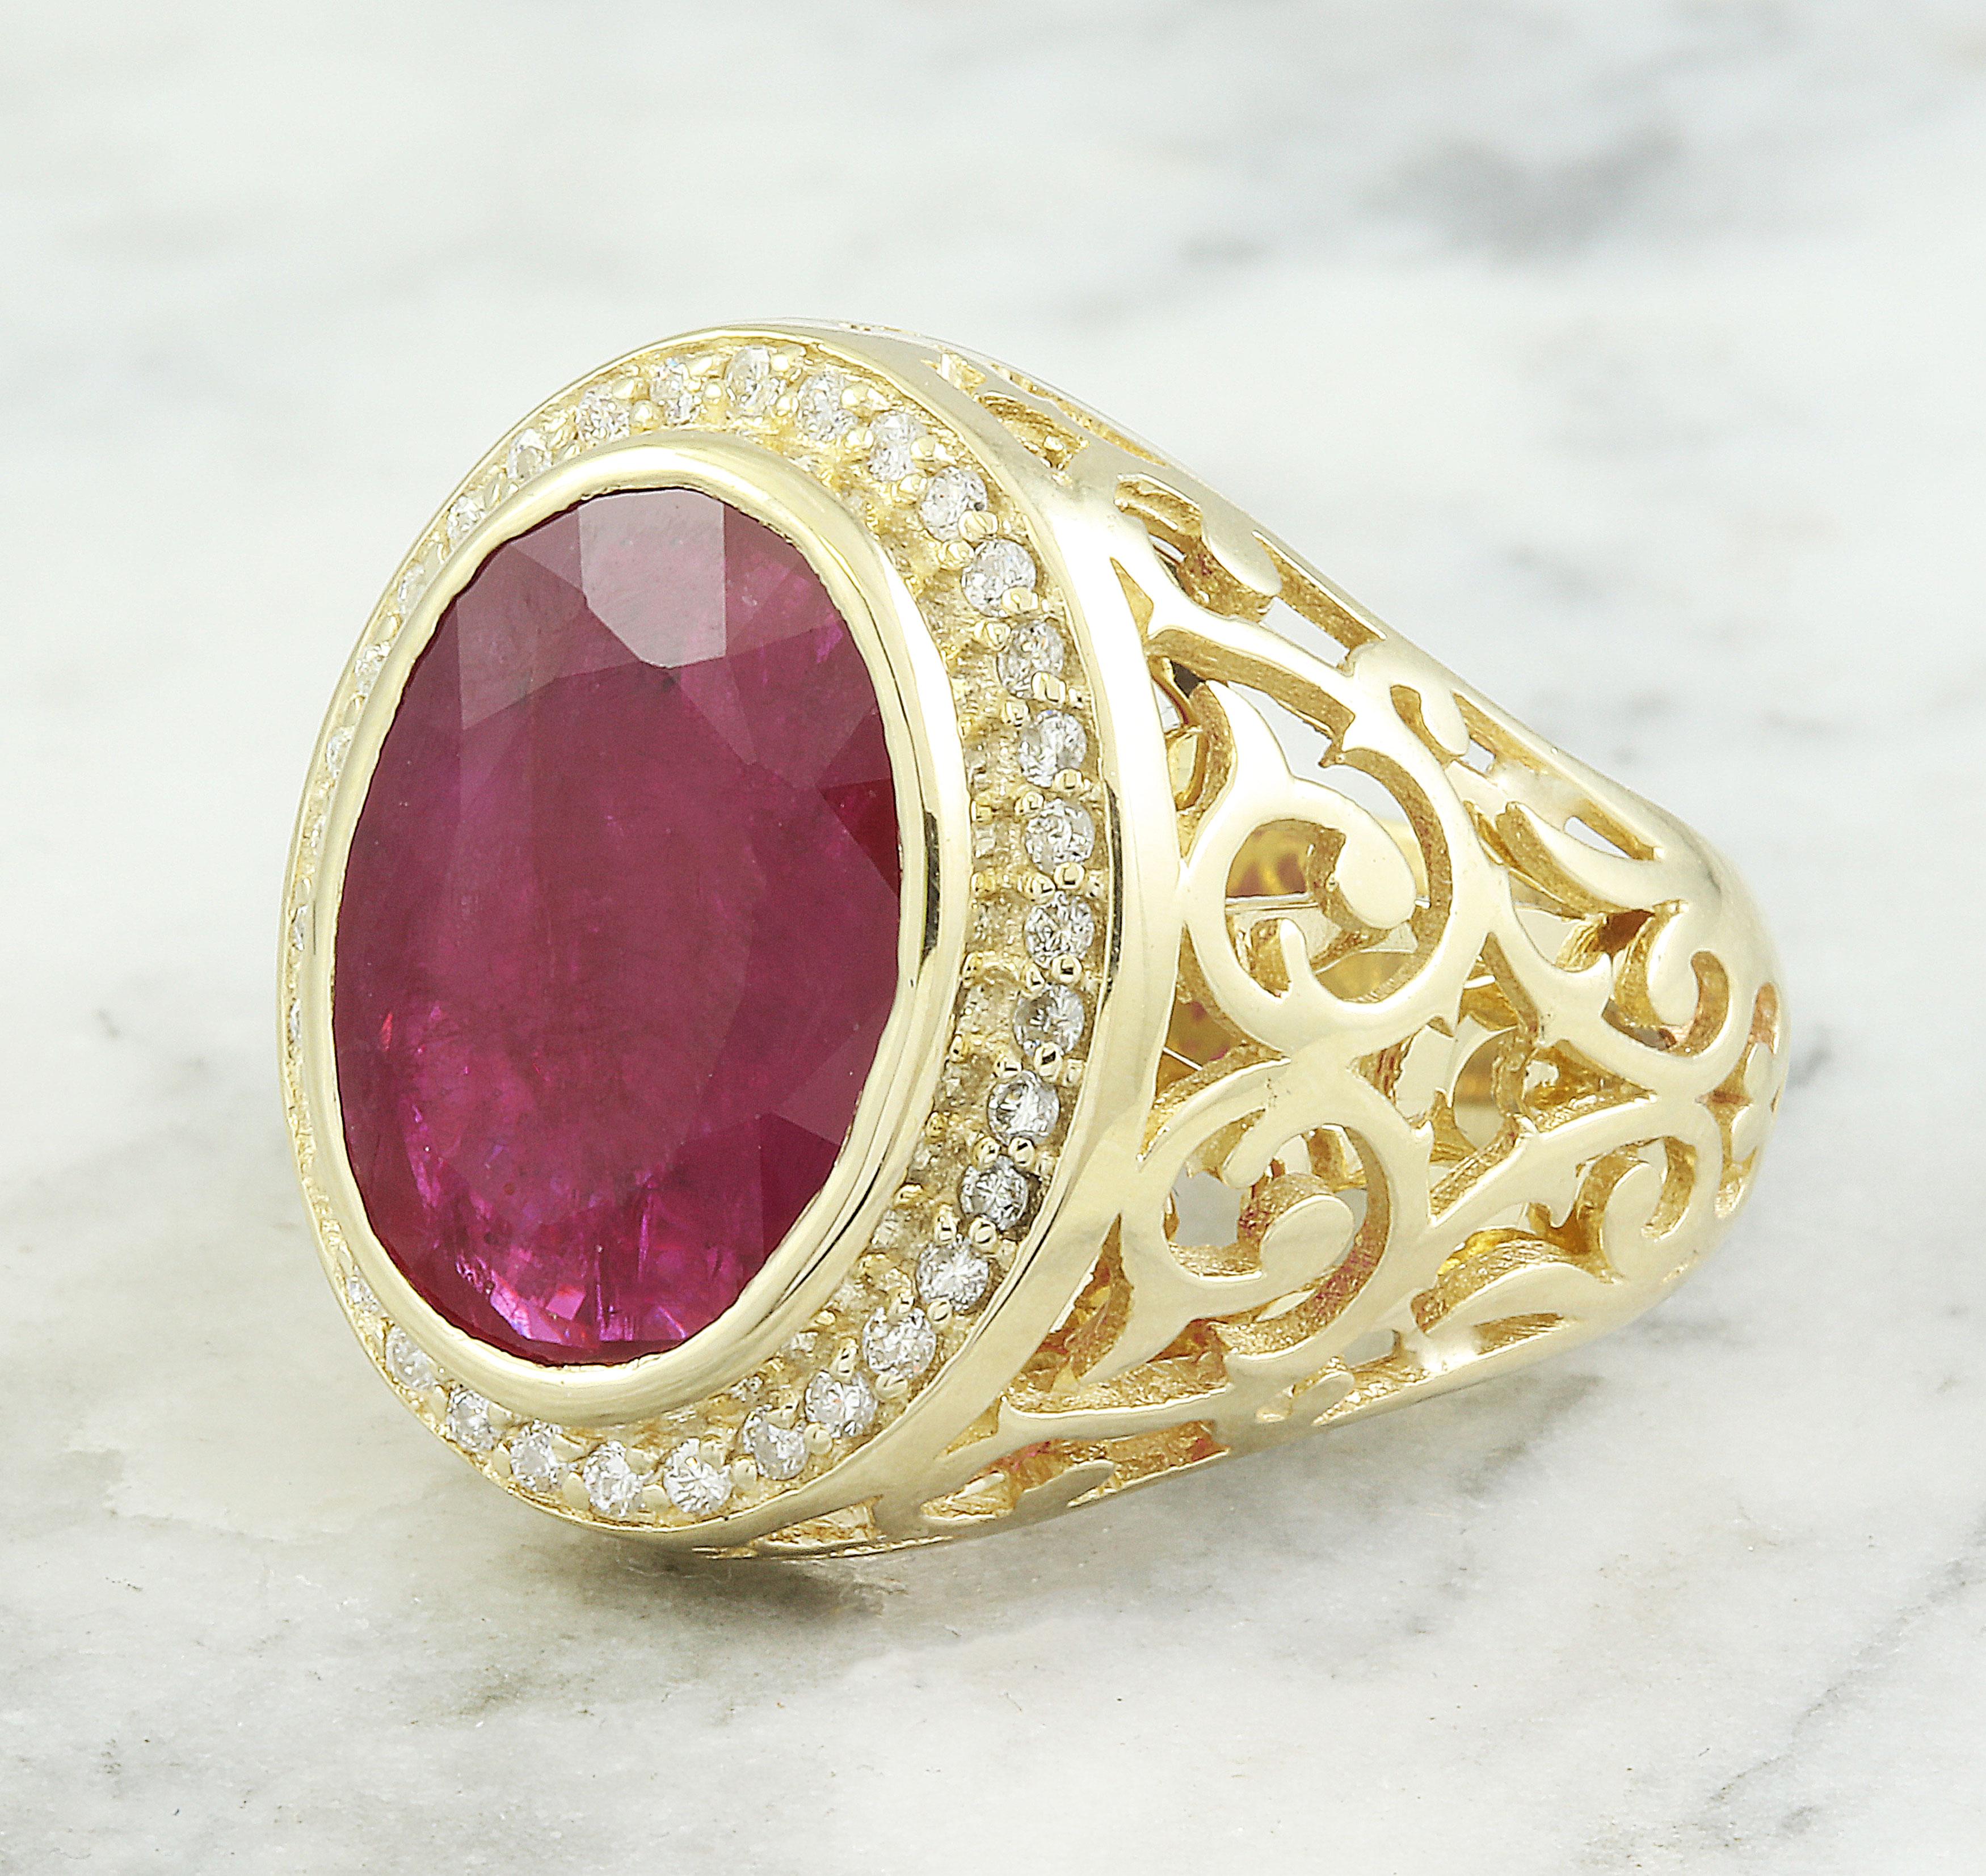 Discover elegance with our 7.78 carat natural ruby diamond ring in 14K solid yellow gold. Featuring a stunning 7.43 carat ruby and 0.35 carats of diamonds, this ring is a statement of timeless beauty. With a total weight of 13.8 grams and a face